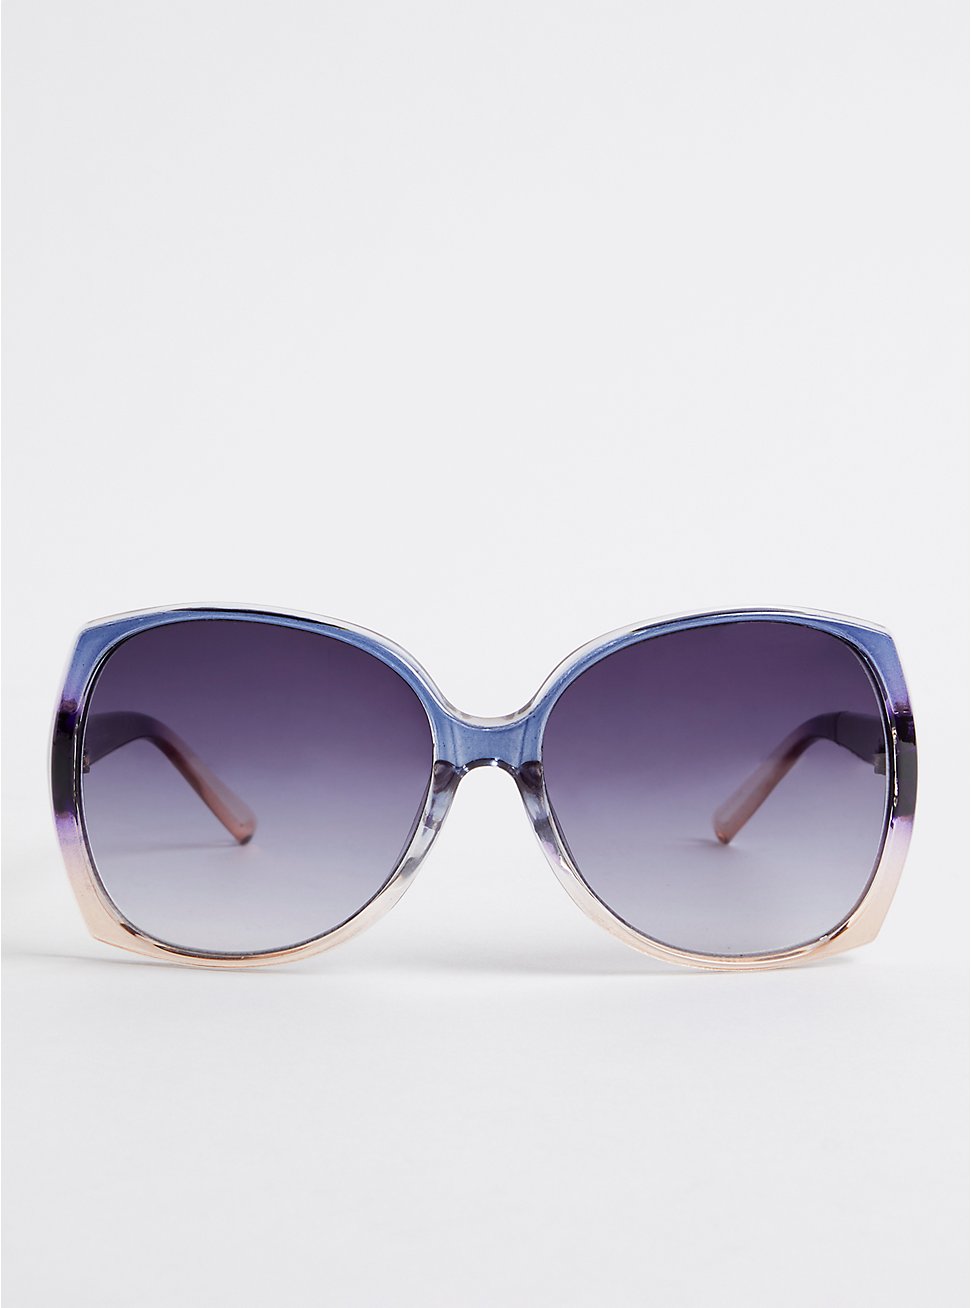 Ombre Square Sunglasses with Smoke Lens - Purple, , hi-res